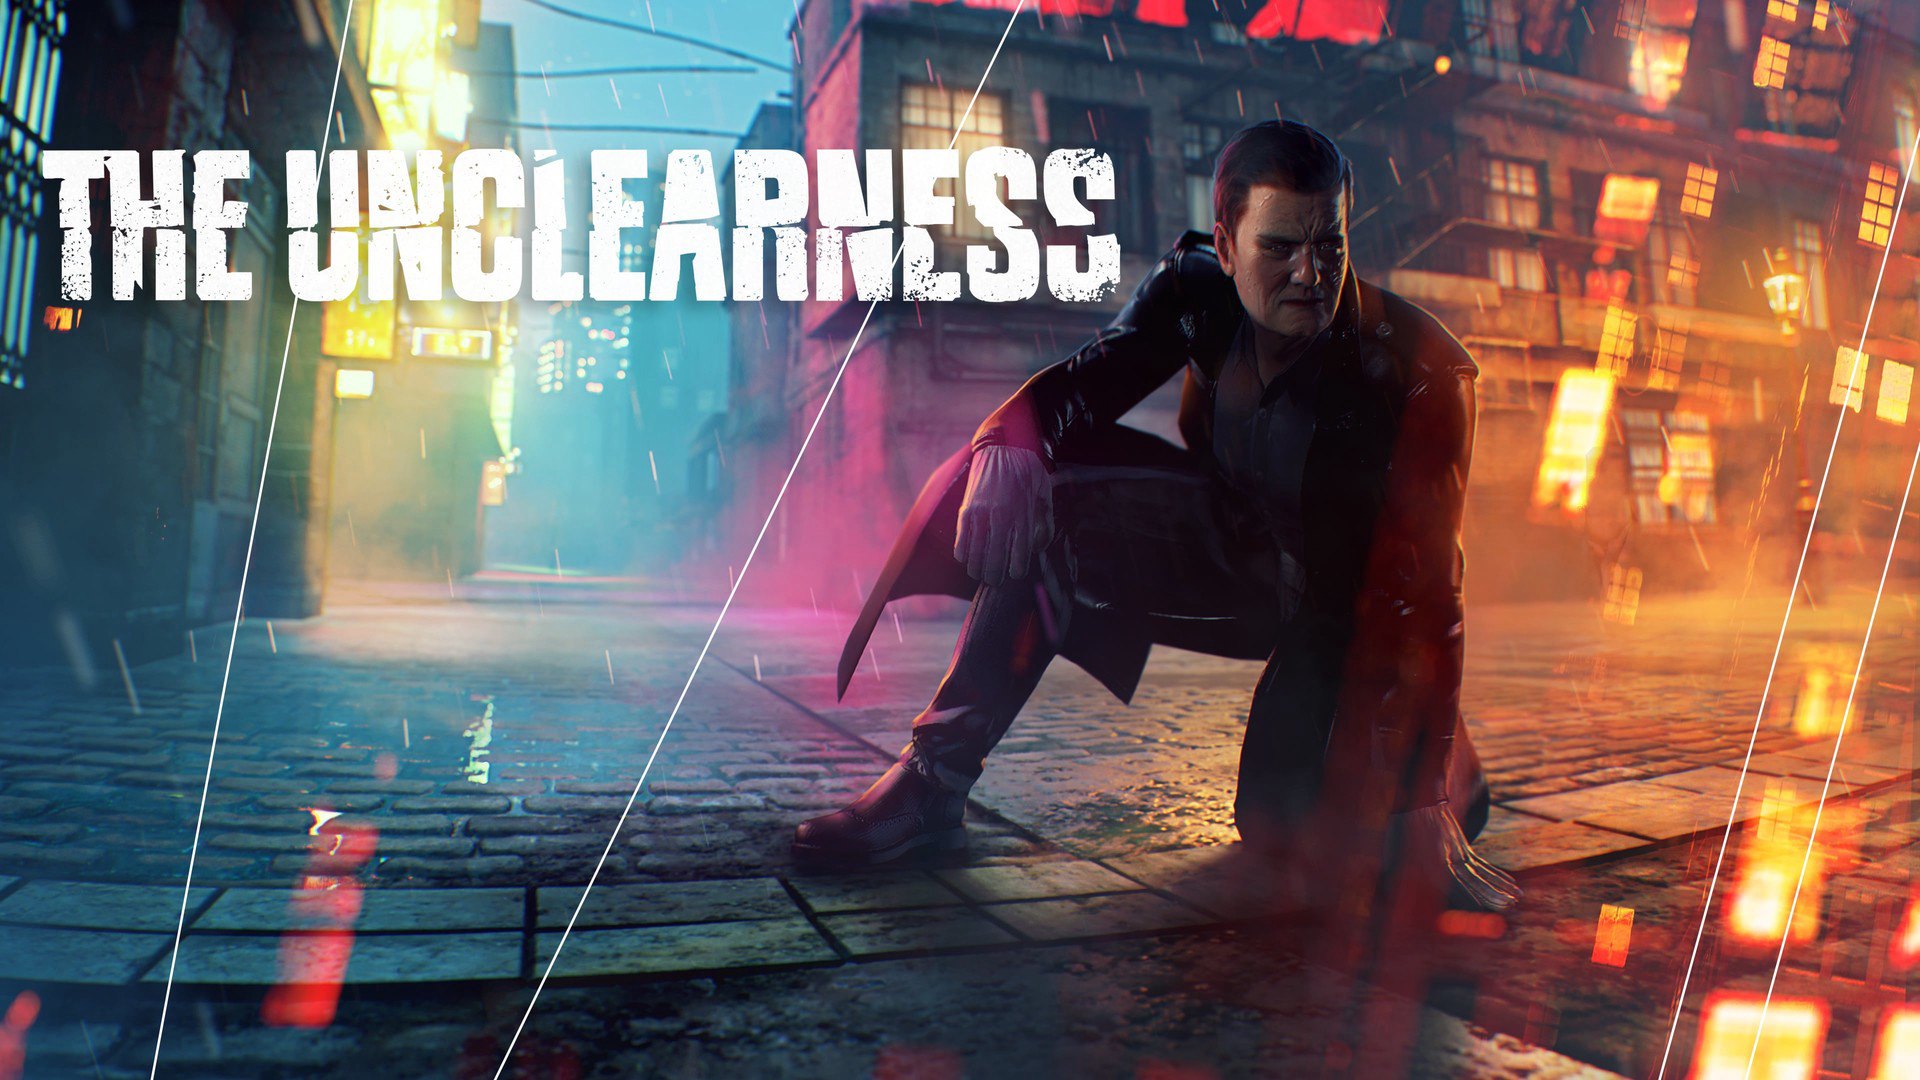 THE UNCLEARNESS Steam CD Key $6.77